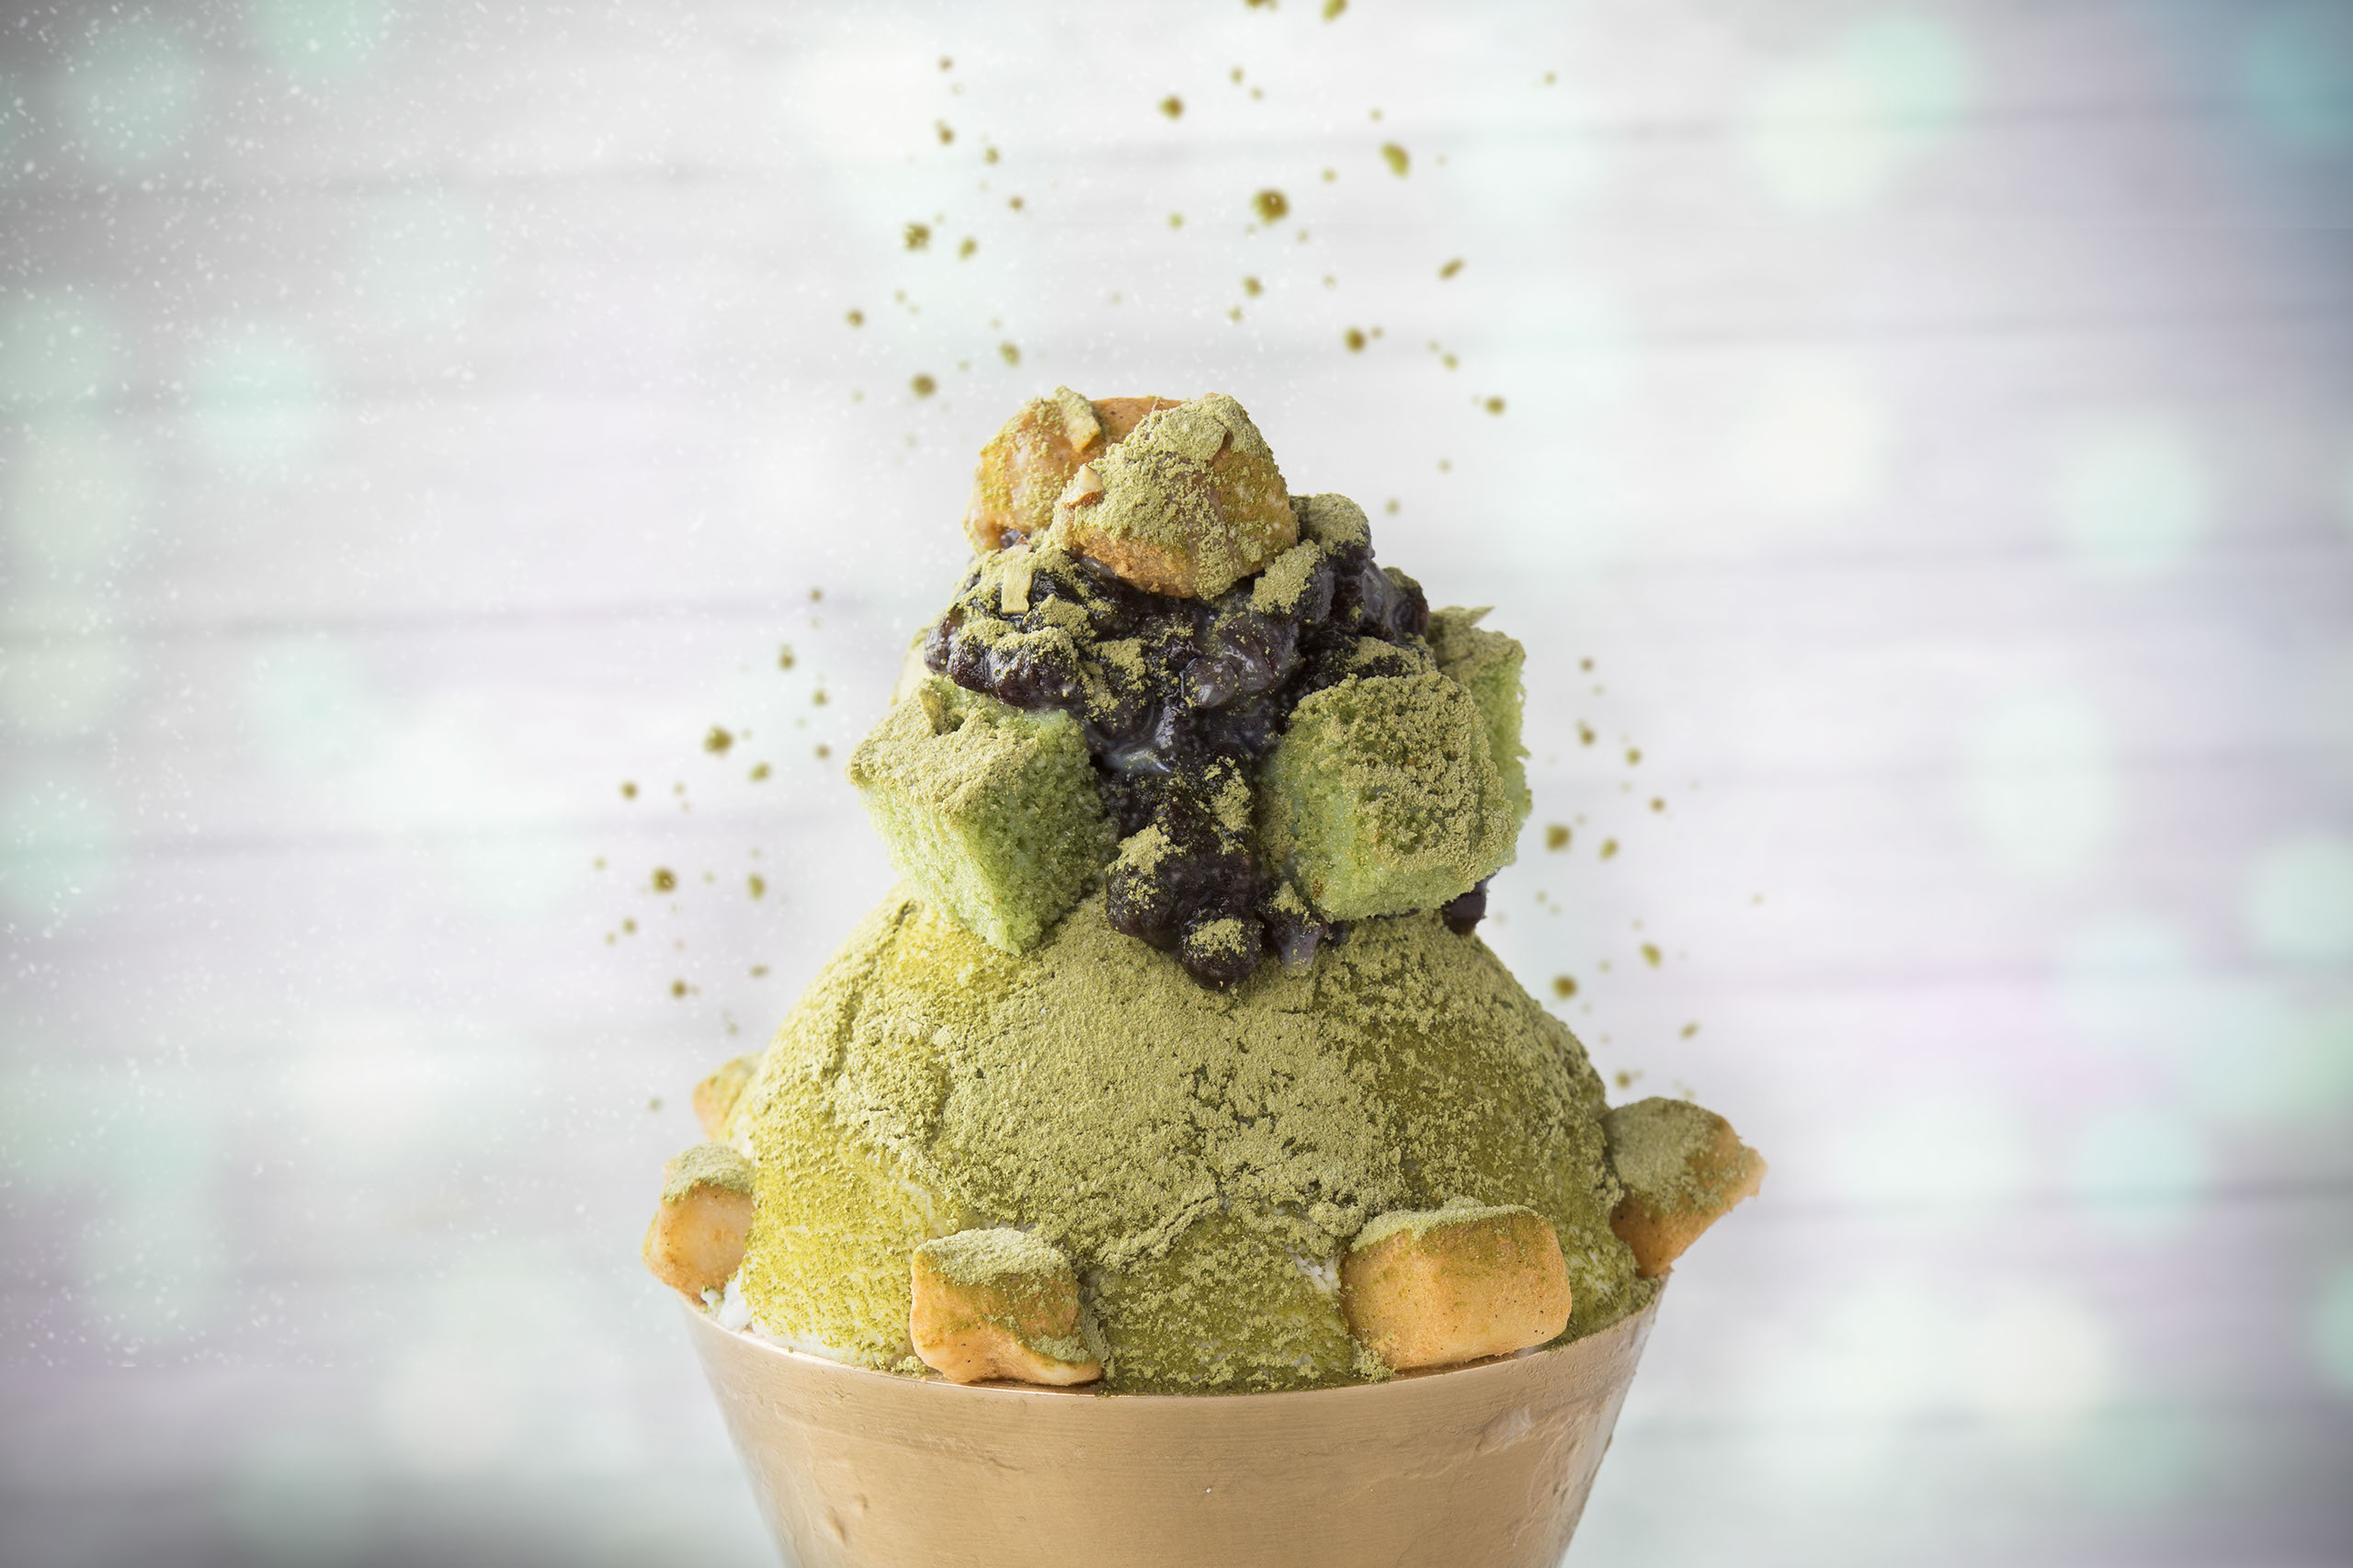 An appetizing shaved ice dessert with matcha topping sprinkled.